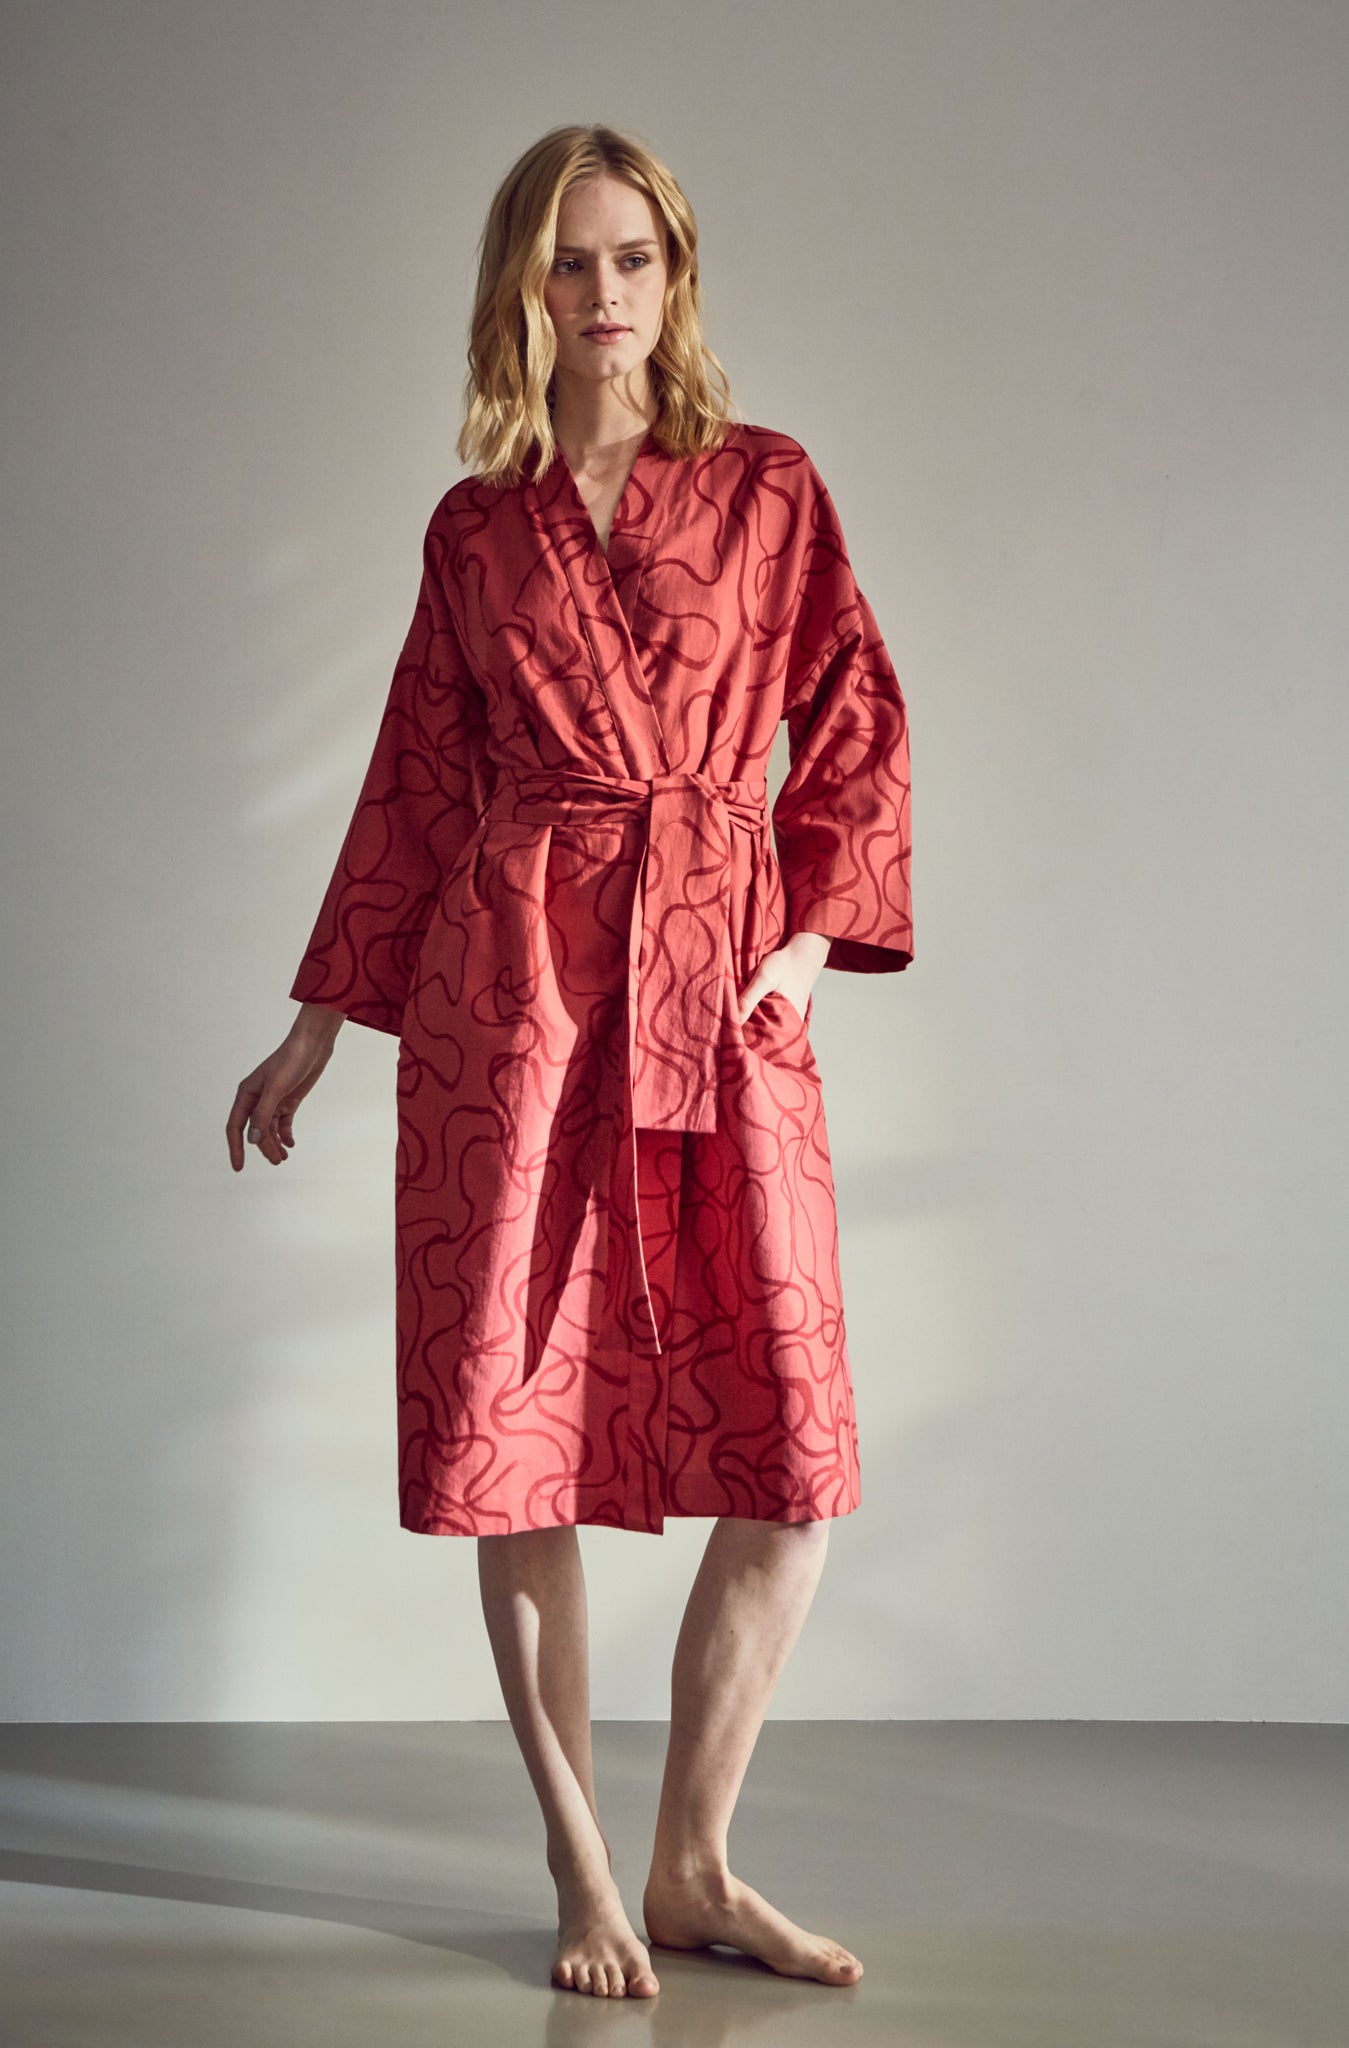 Khadi cotton robe, hand spun and hand woven from sustainable cotton in India. Hand printed with original Robe de Voyage designs. Sustainable luxury for the conscious consumer. Perfect gift for an expecting mother or to give as a house gift. 